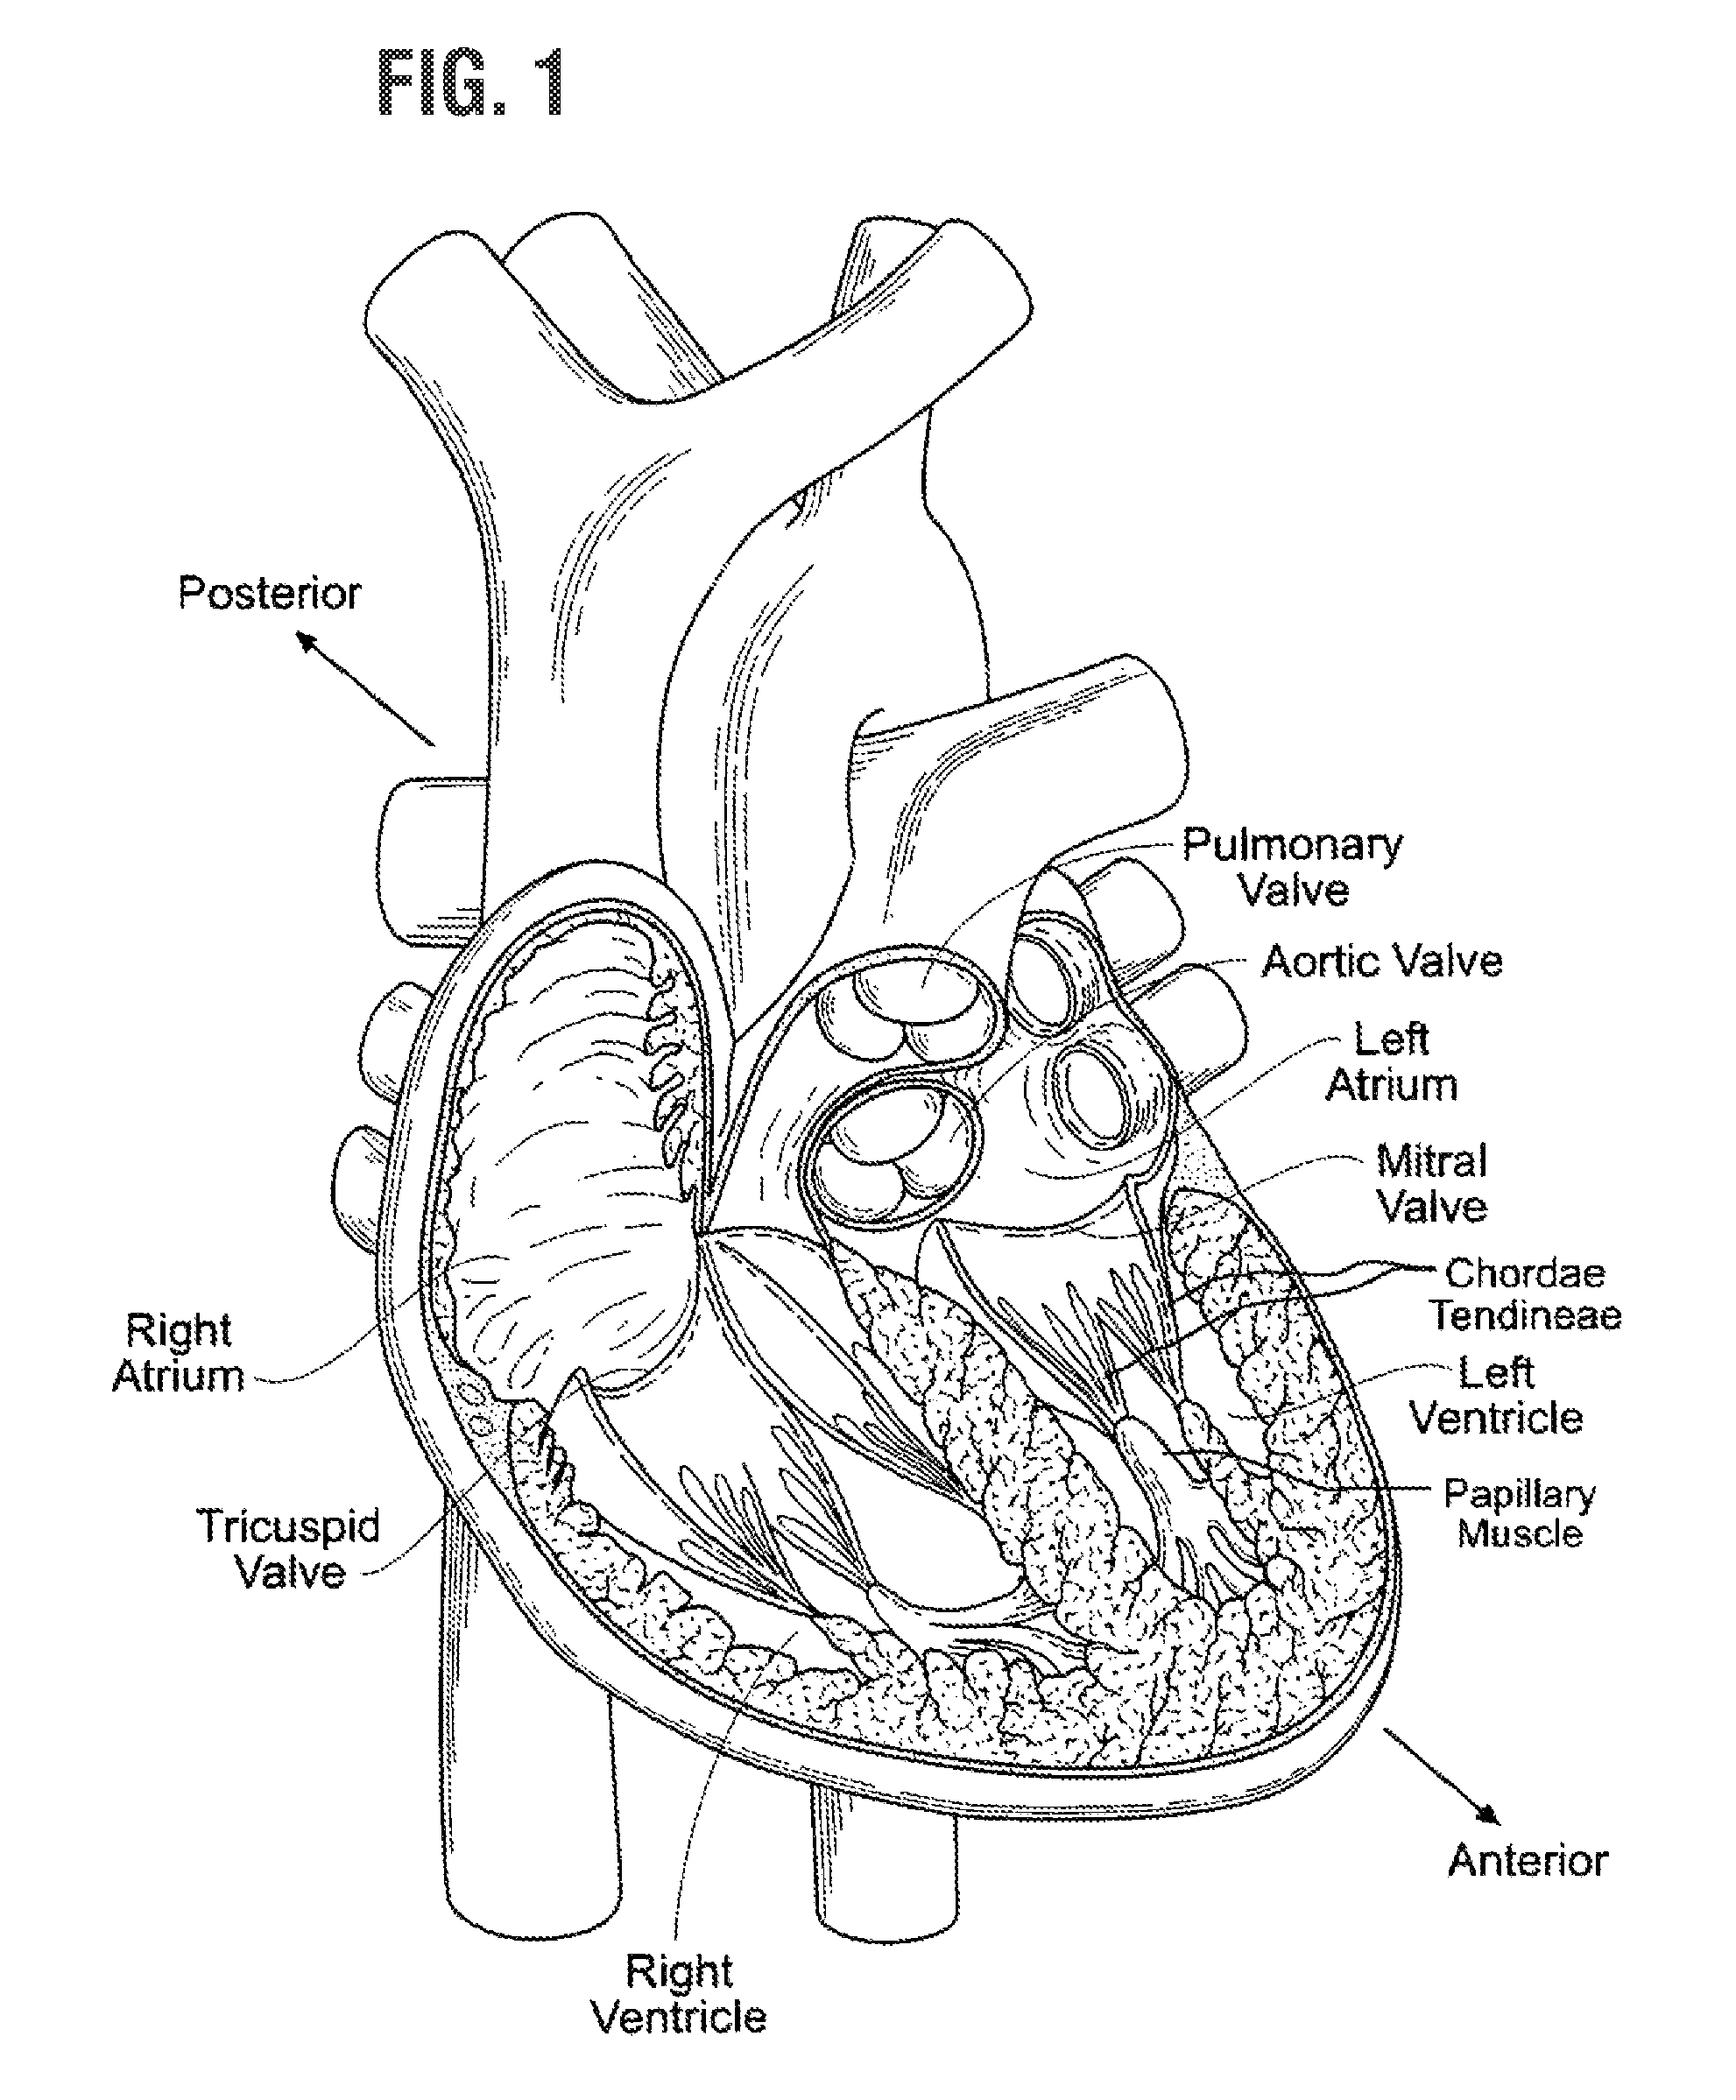 Rapidly deployable surgical heart valves